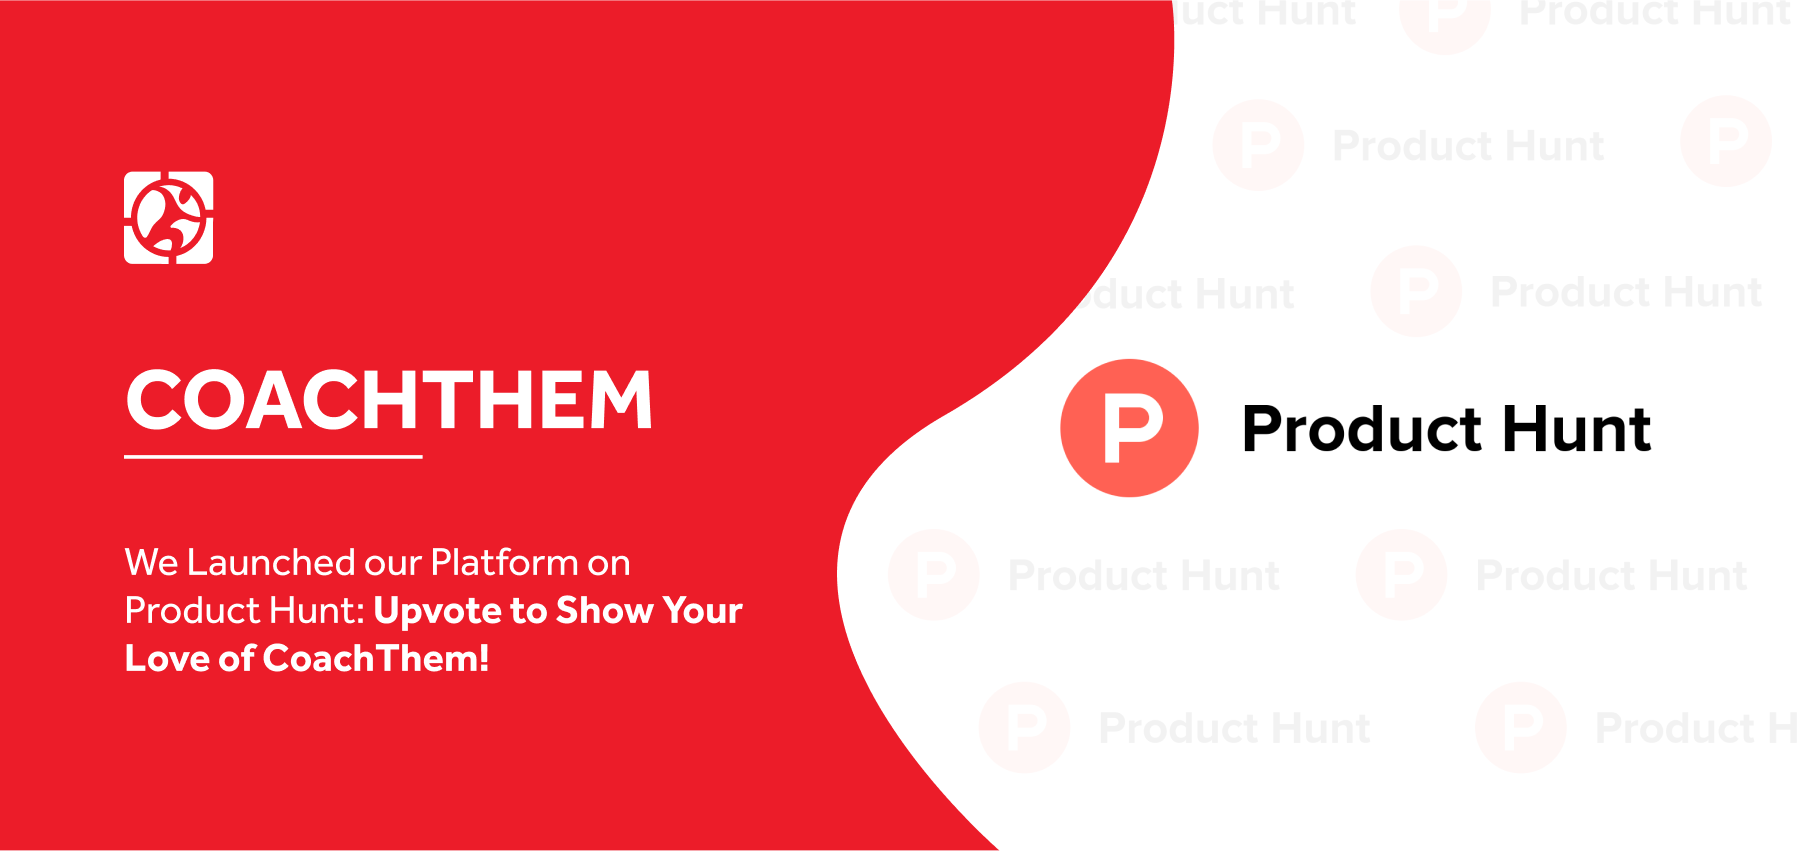 We Launched our Platform on Product Hunt: Upvote to Show Your Love of CoachThem!